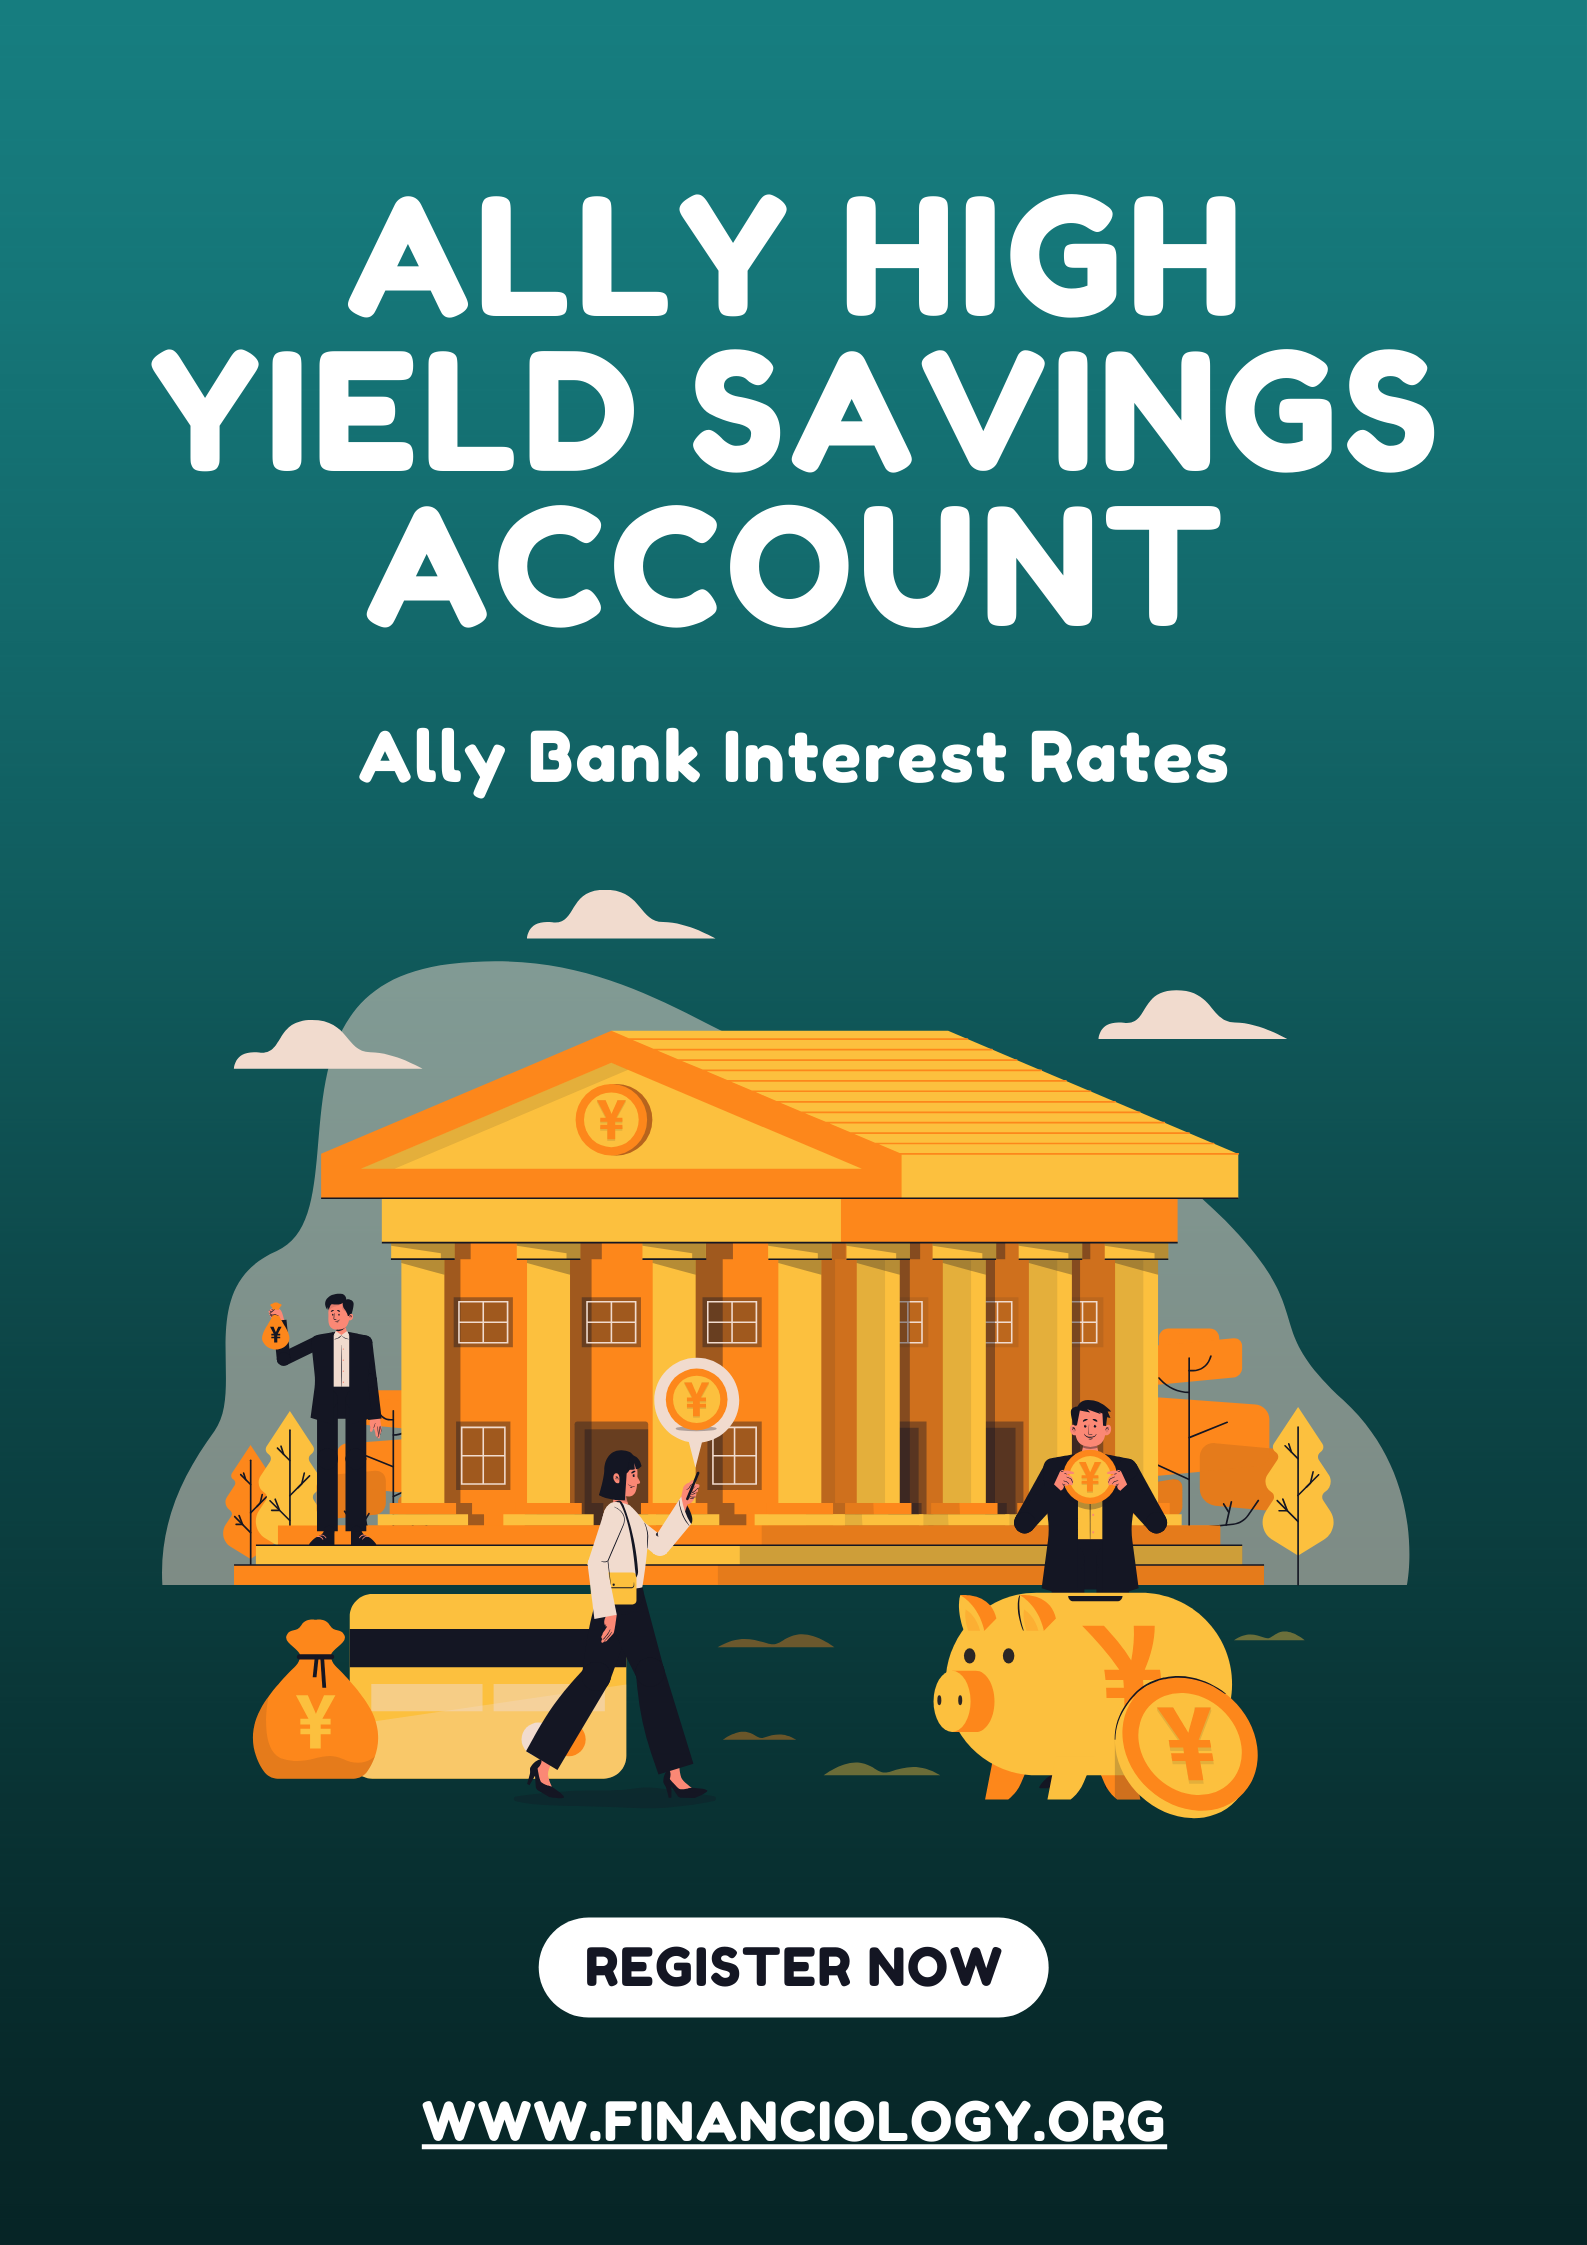 ally high yield savings account; ally saving rate; ally bank; ally interest rates; financiology; financial planning;